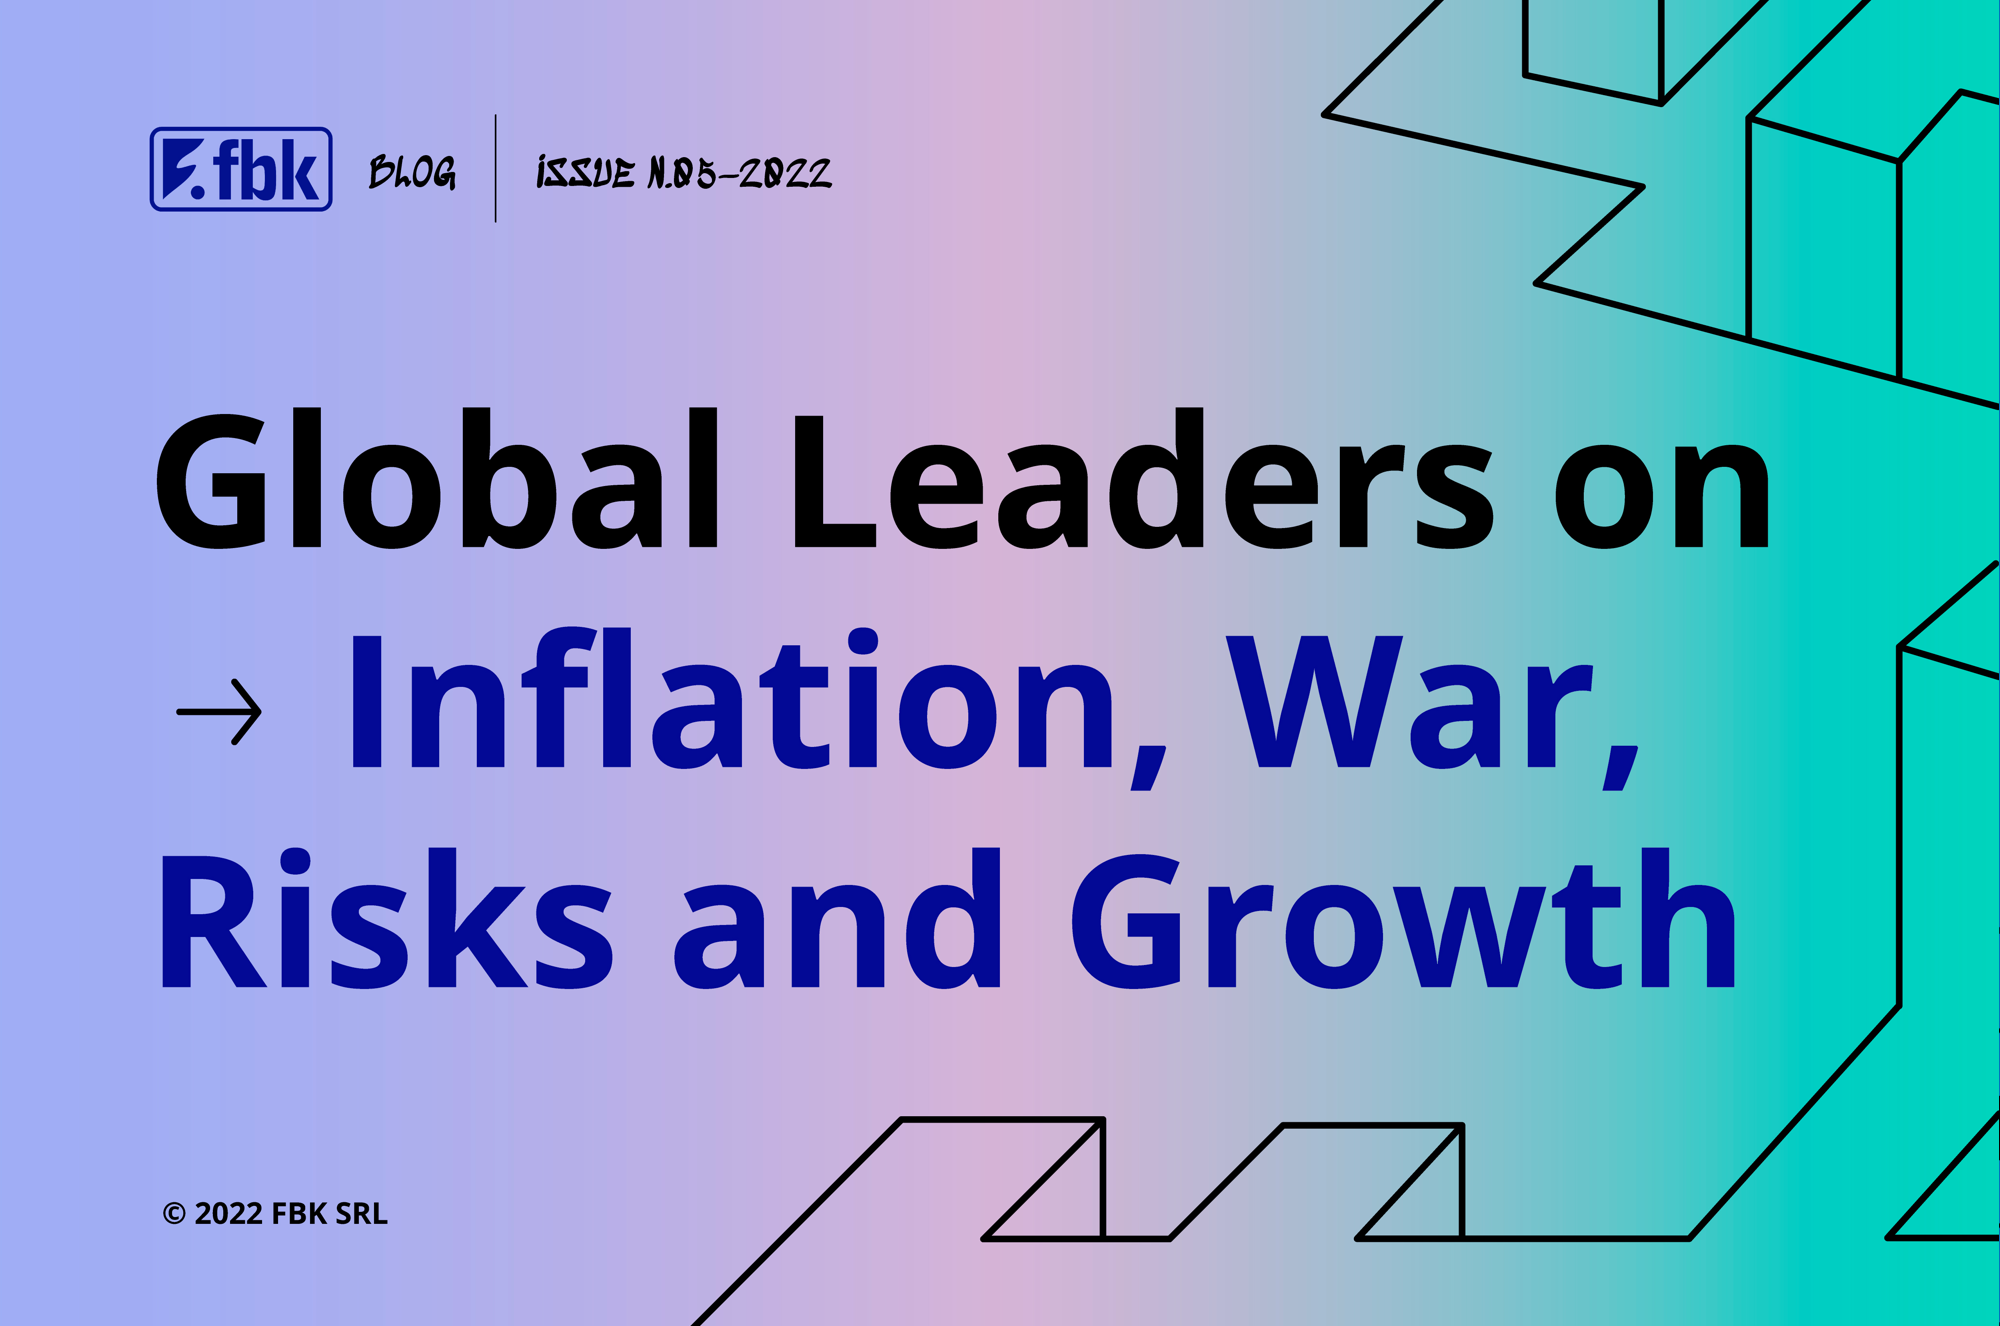 Global Leaders on Inflation, War, Risks and Growth